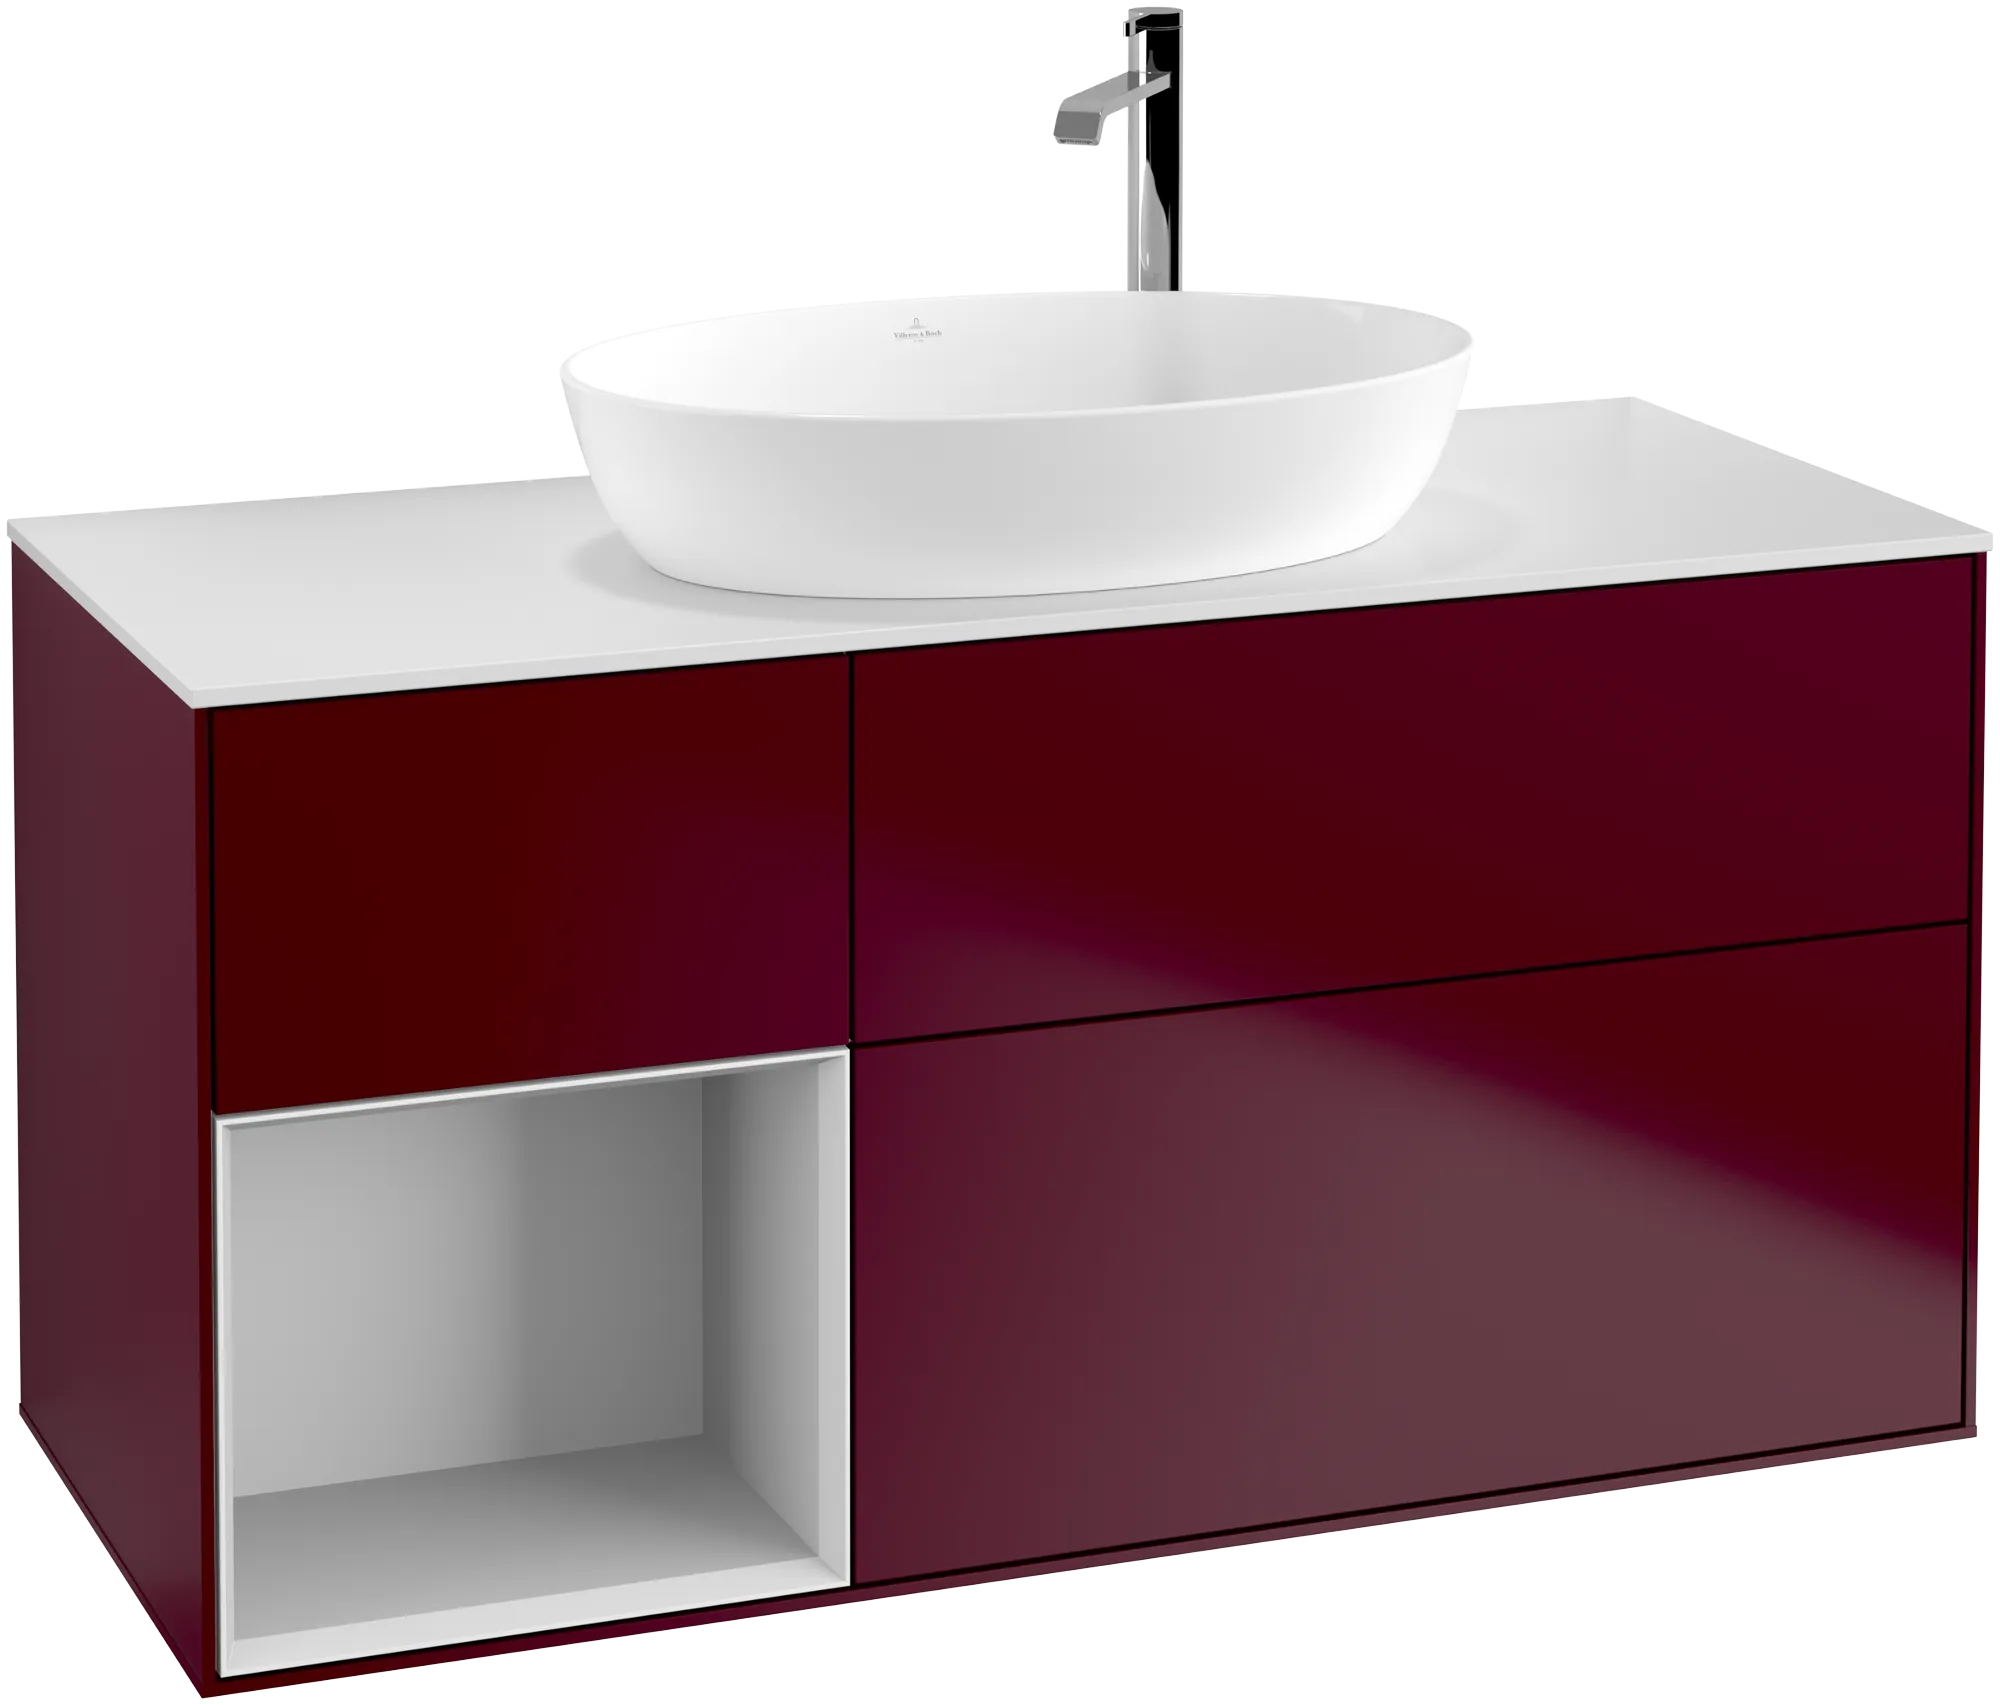 Picture of VILLEROY BOCH Finion Vanity unit, with lighting, 3 pull-out compartments, 1200 x 603 x 501 mm, Peony Matt Lacquer / White Matt Lacquer / Glass White Matt #G941MTHB